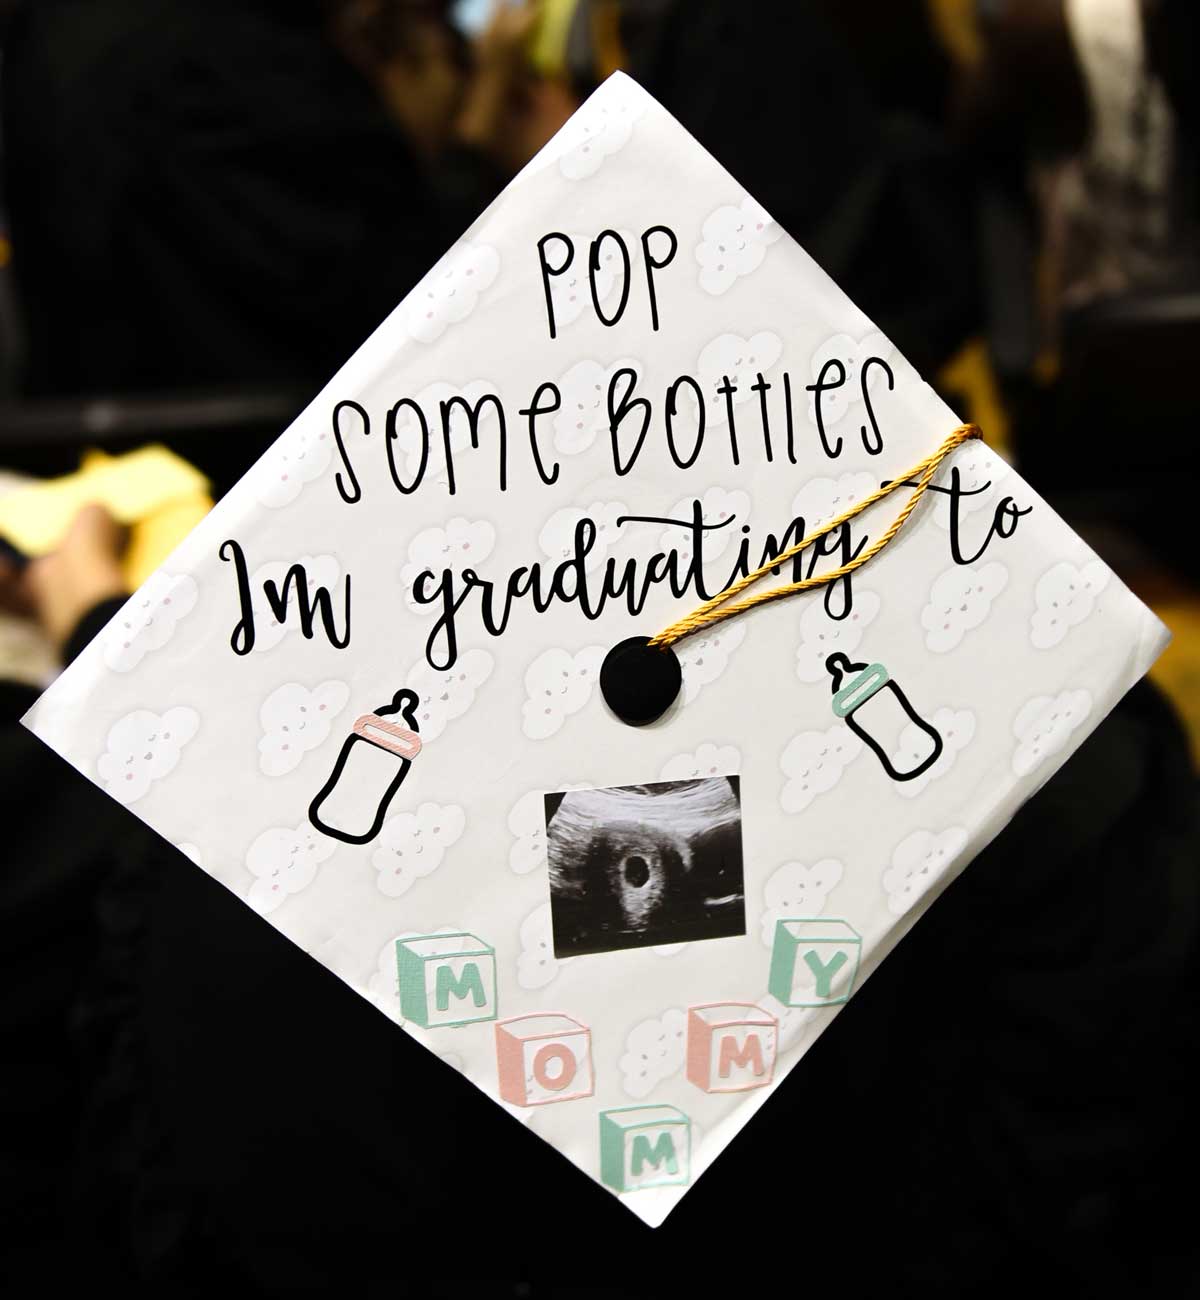 Grad cap decorated with text: Pop some bottles, I'm graduating to Mommy